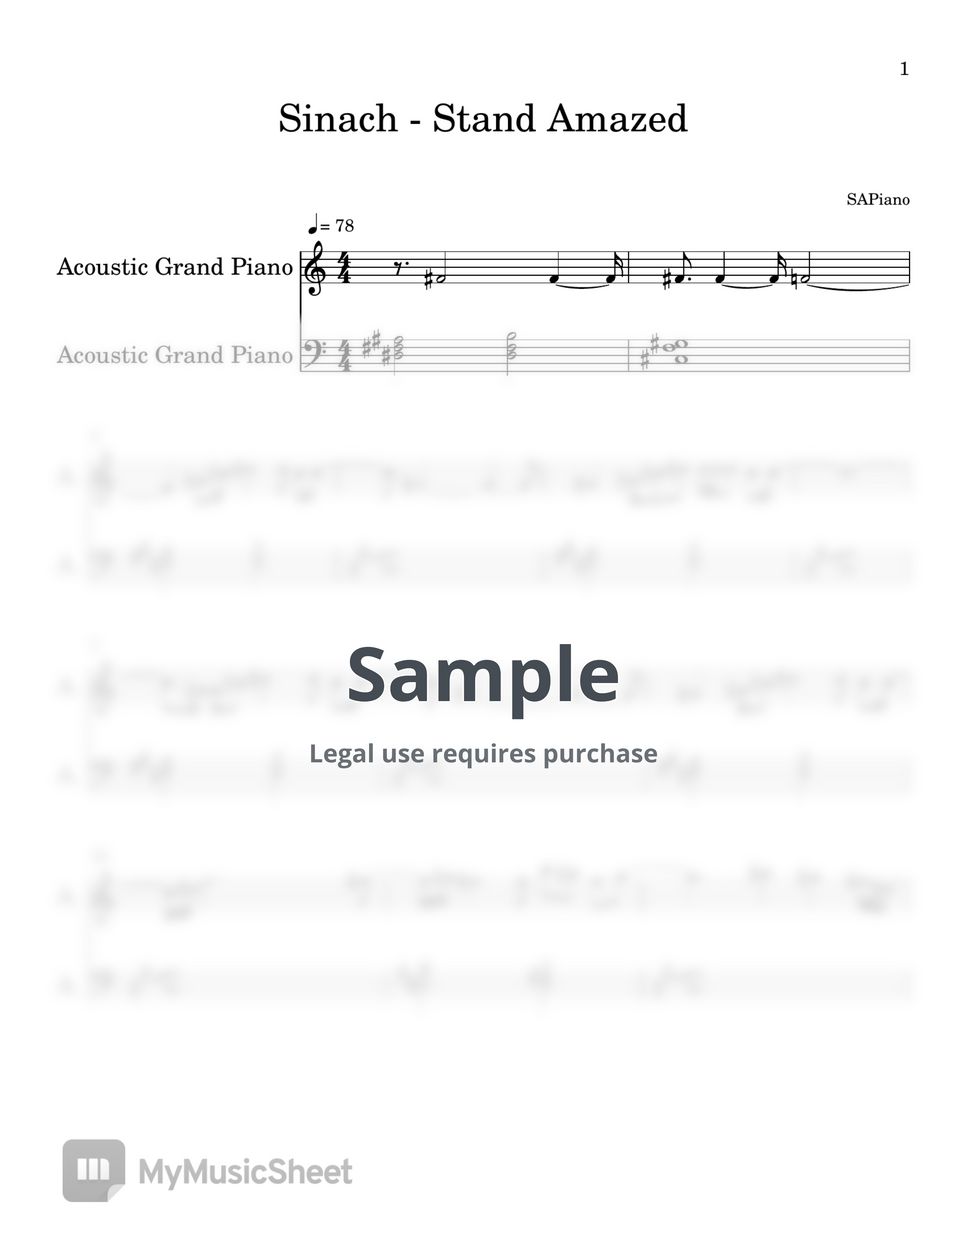 Sinach - Stand Amazed (PIANO SHEET) by SAPiano